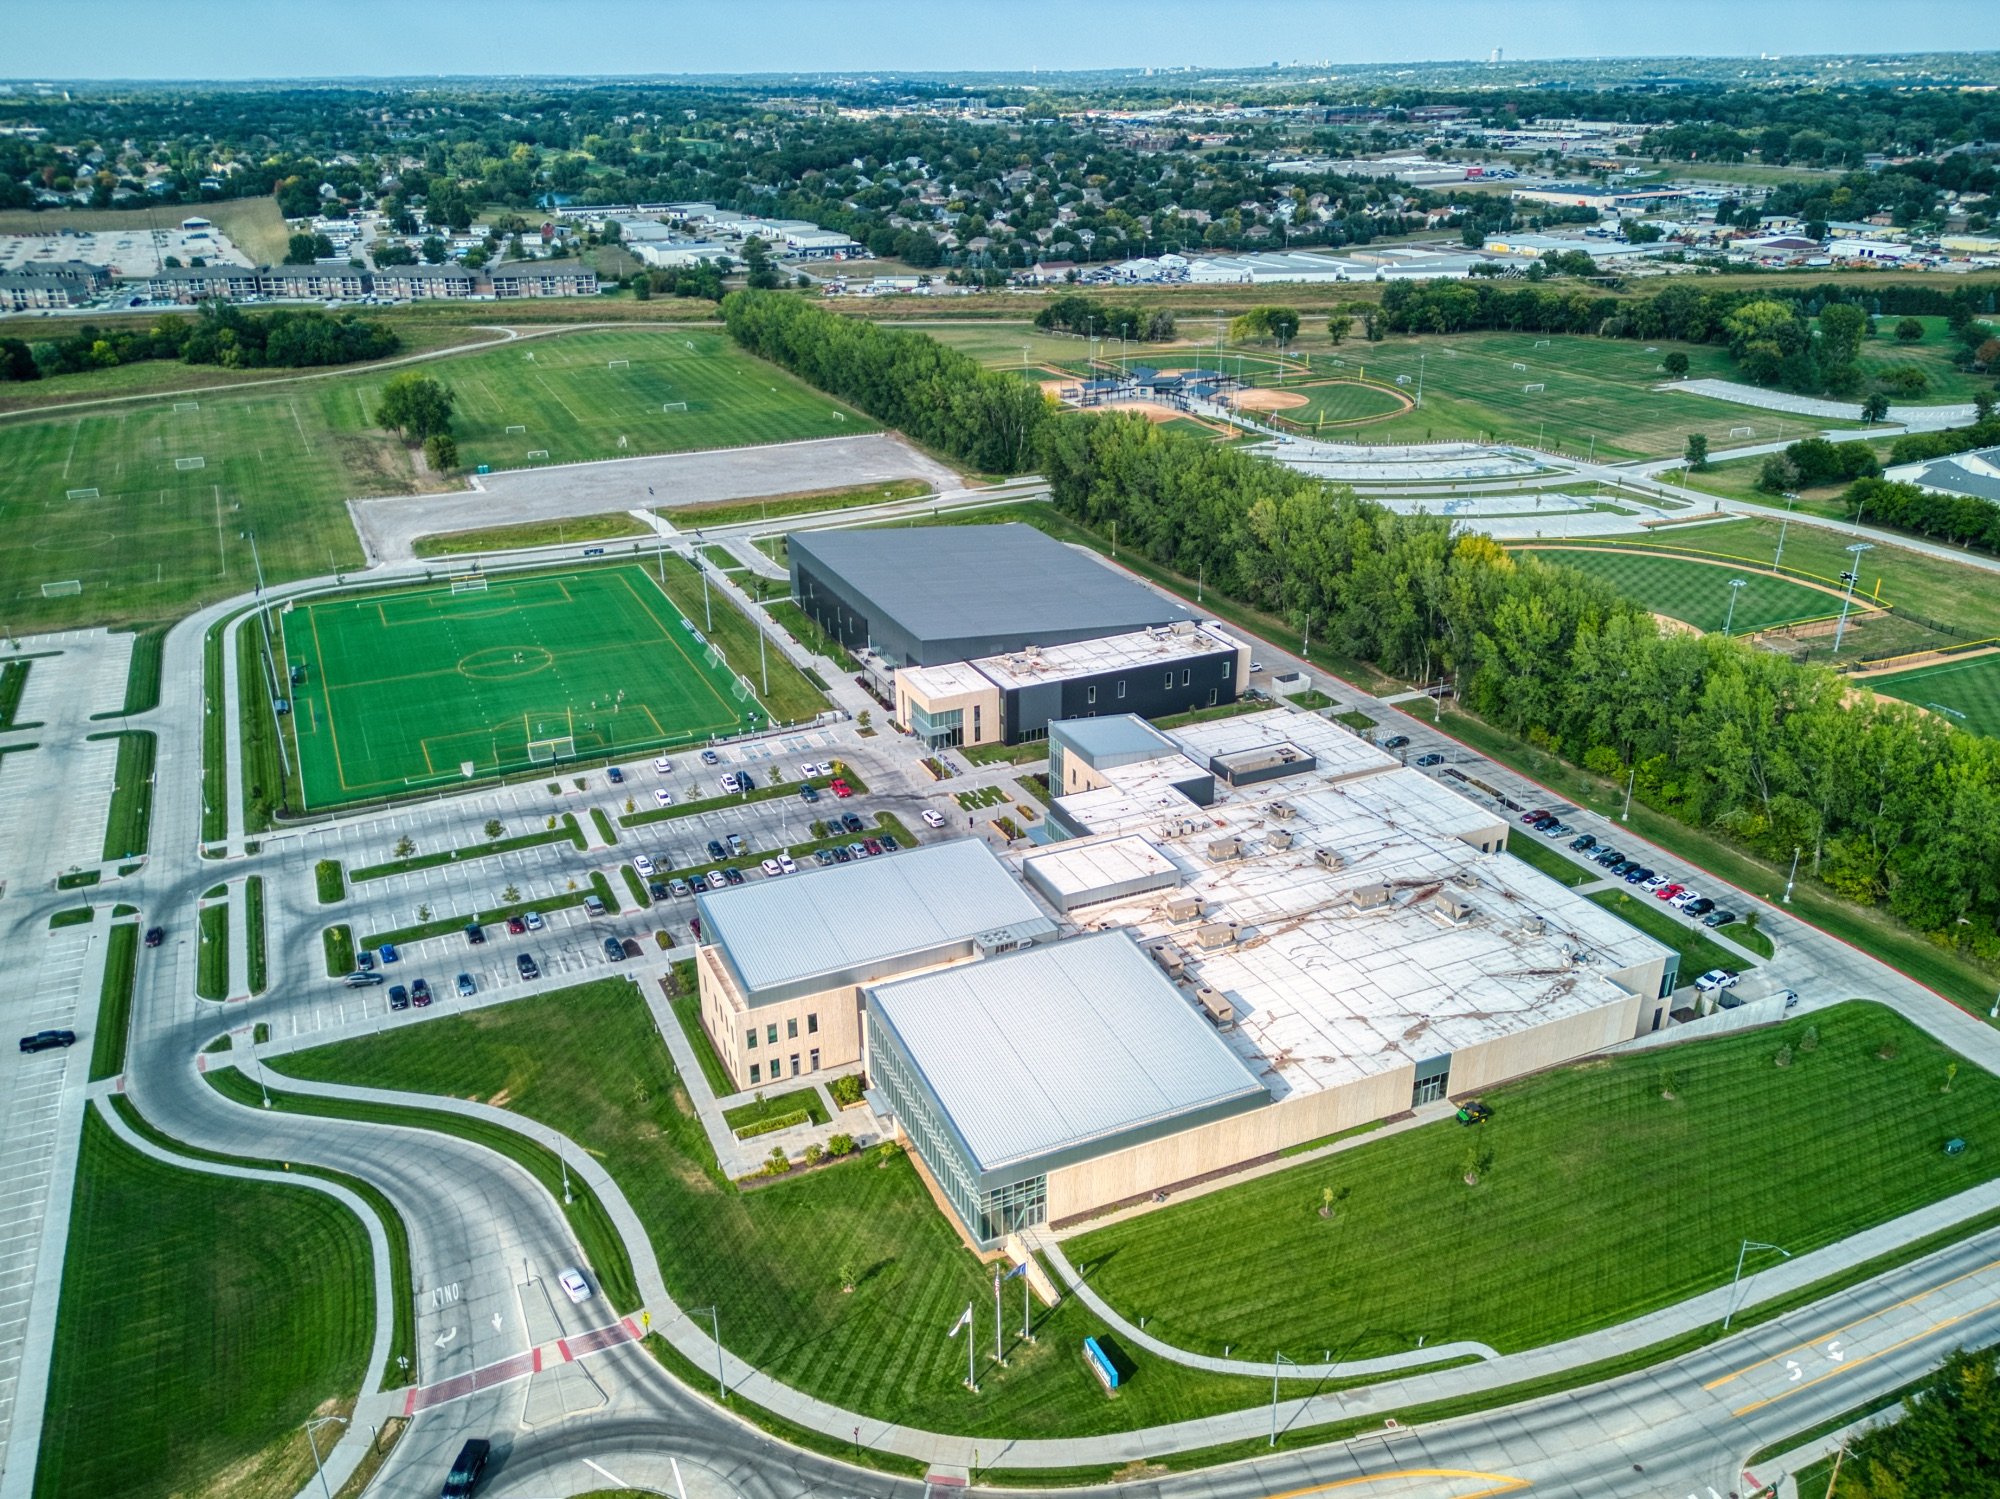 Aerial View of Papillion Landing including Soccer, Baseball, and Softball Fields